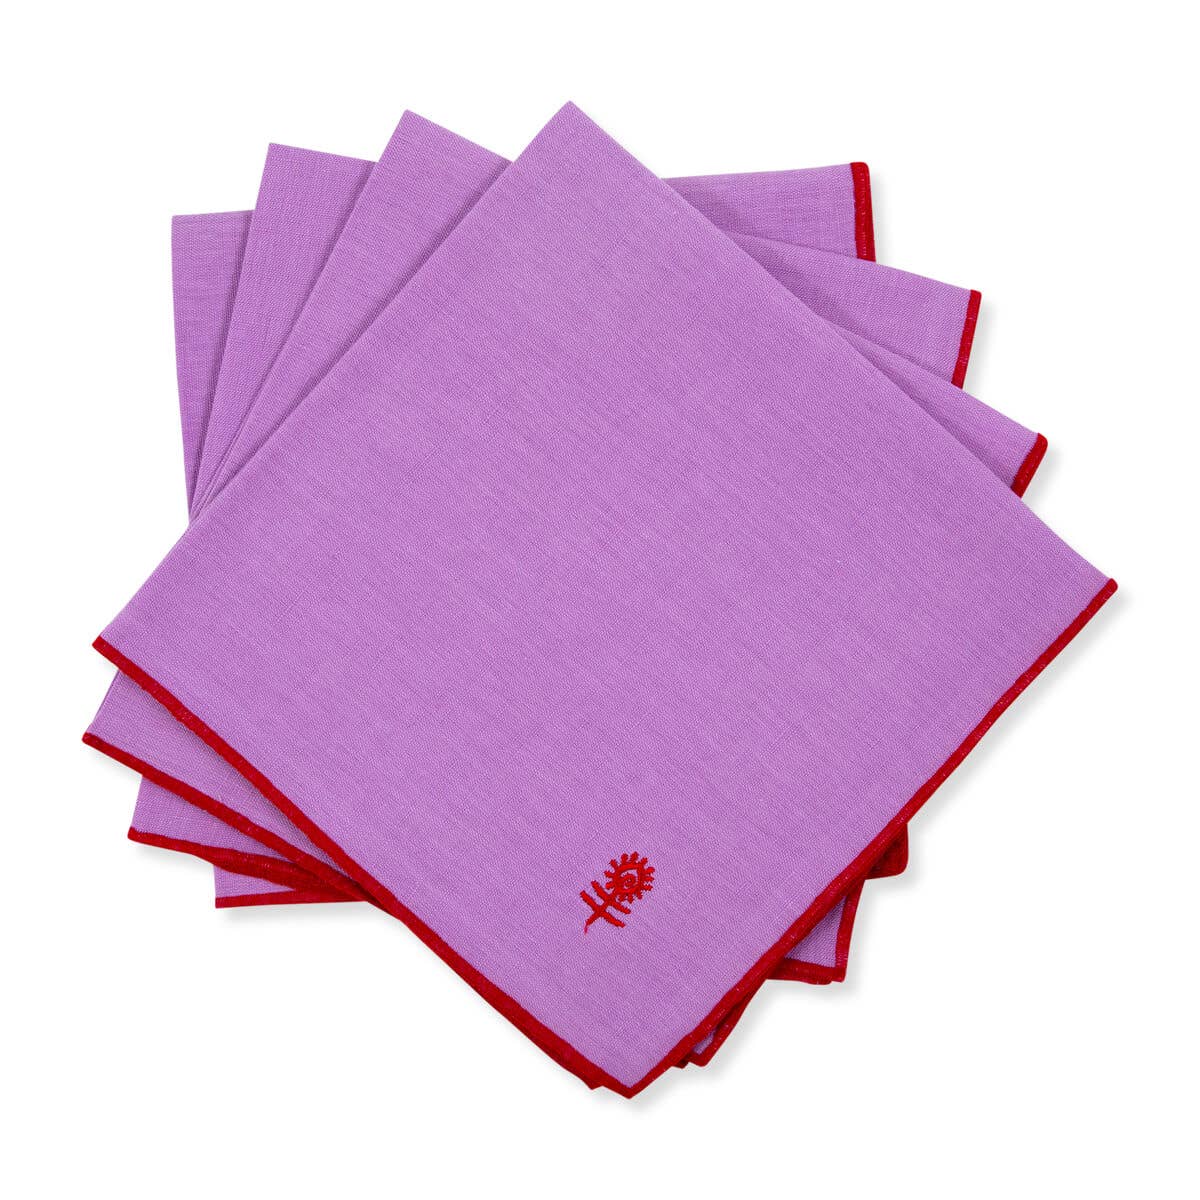 Icon Linen Napkin in Lilac/Cherry, Set of 4